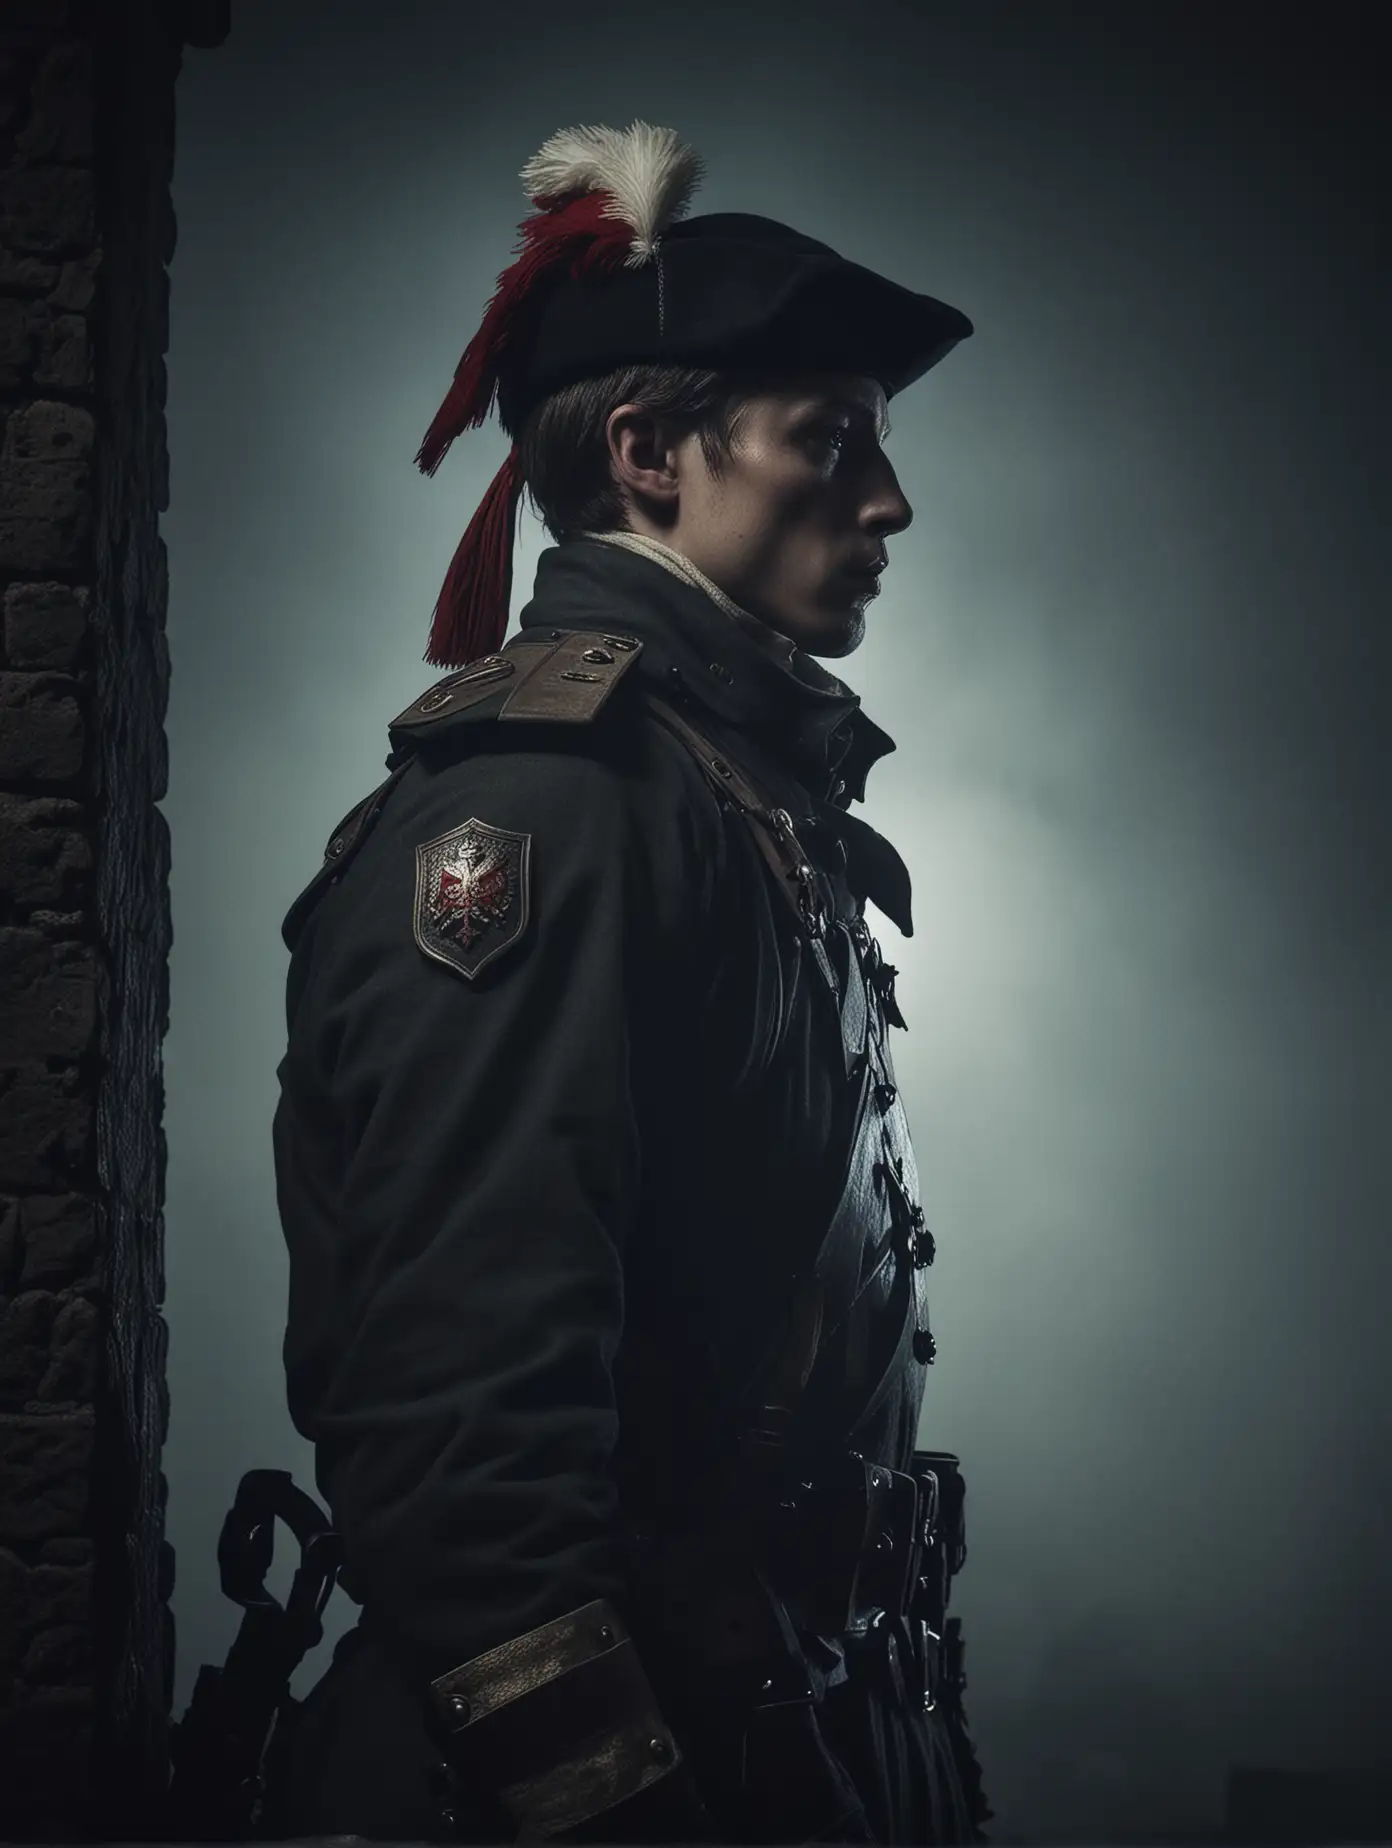 An epic scene in 17th century featuring a young polish soldier in half profile, full height, on duty at the guard tower of the fortress, dark night, ghostly atmosphere, fog, side cinematic view.